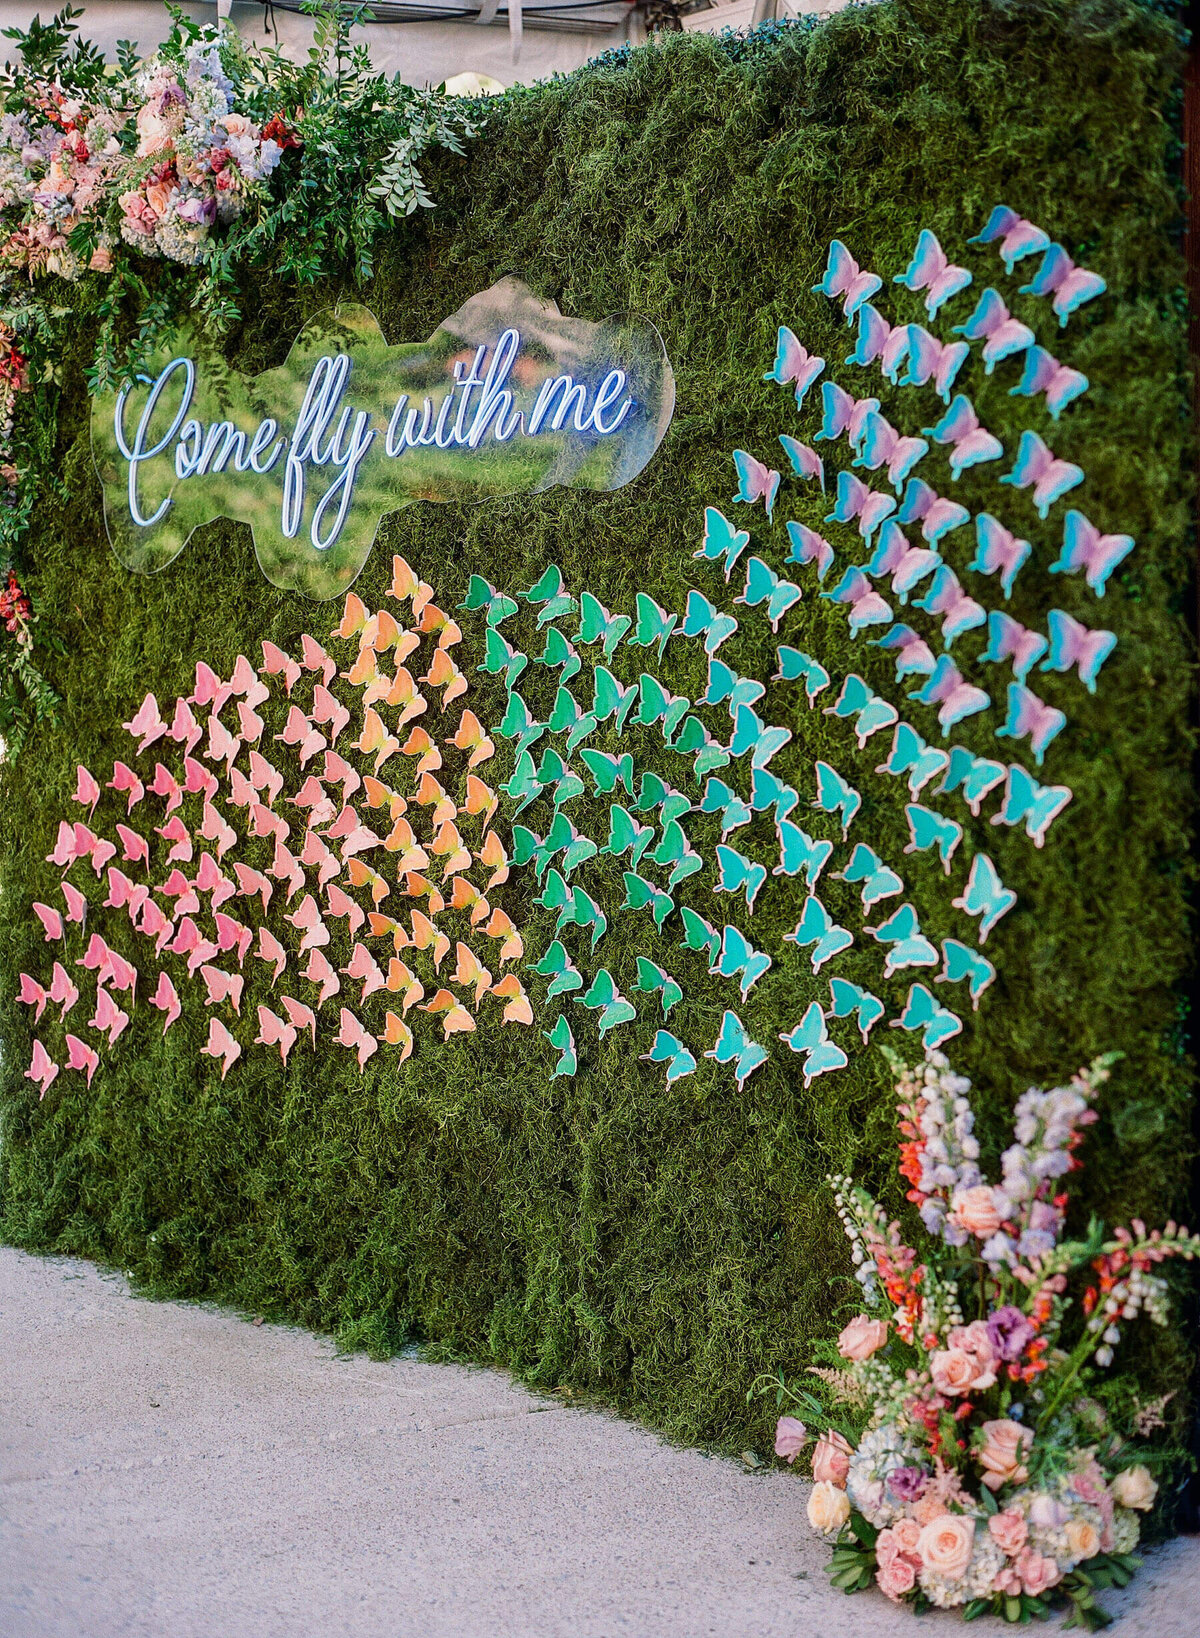 Custom escort card wall with colorful butterfly escort cards for table numbers at Saddle Woods Farm.